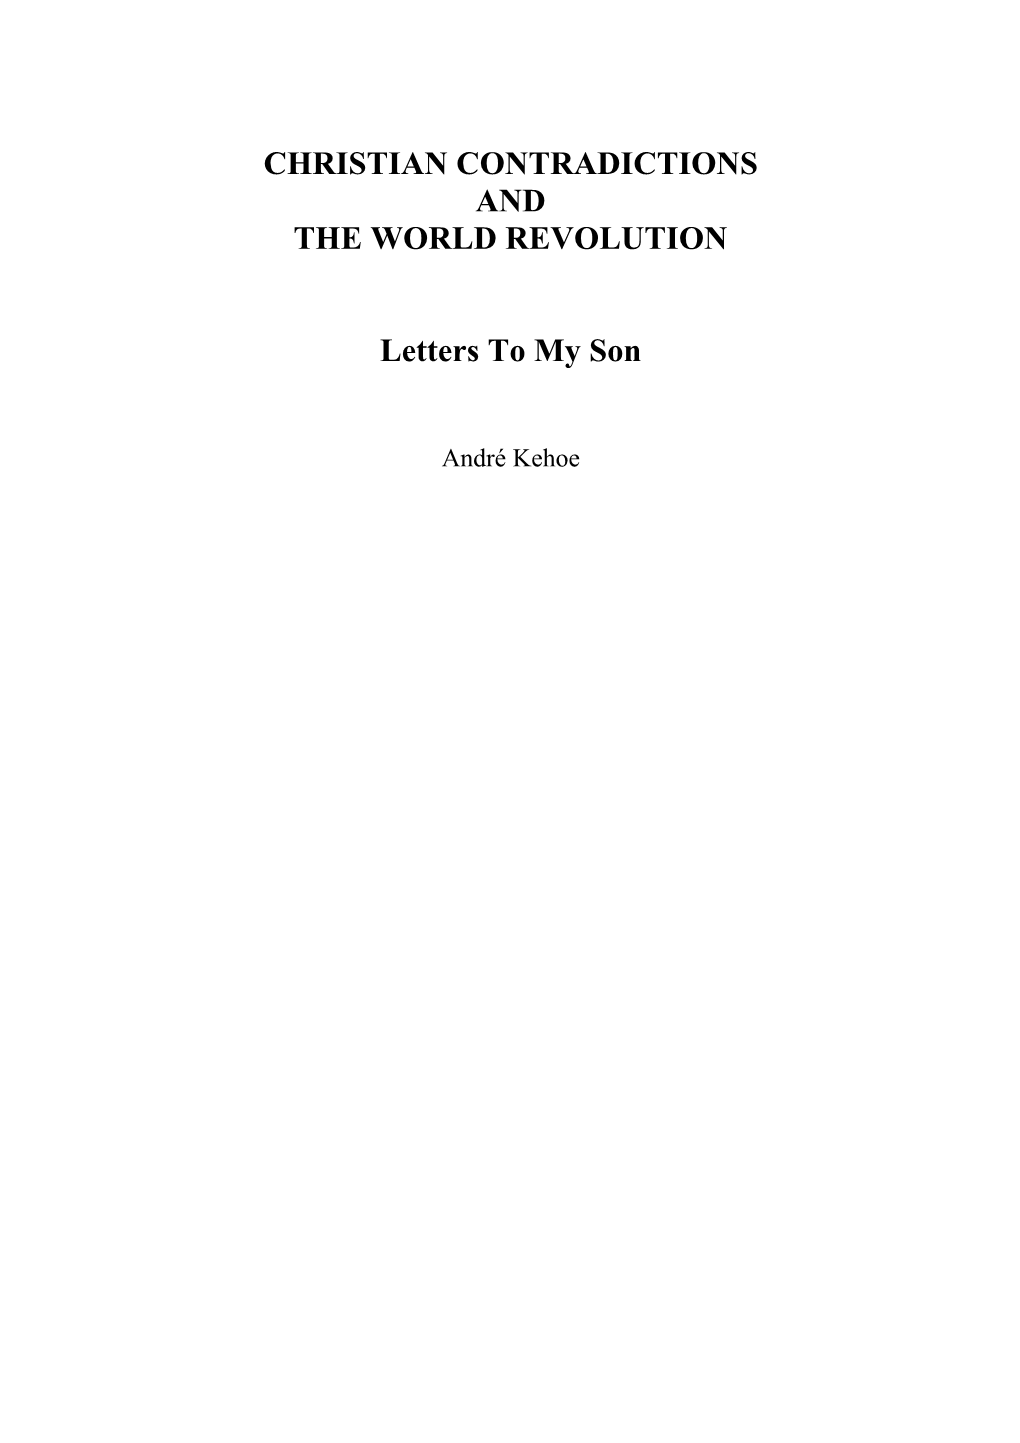 Christian Contradictions and the World Revolution by Andre Kehoe